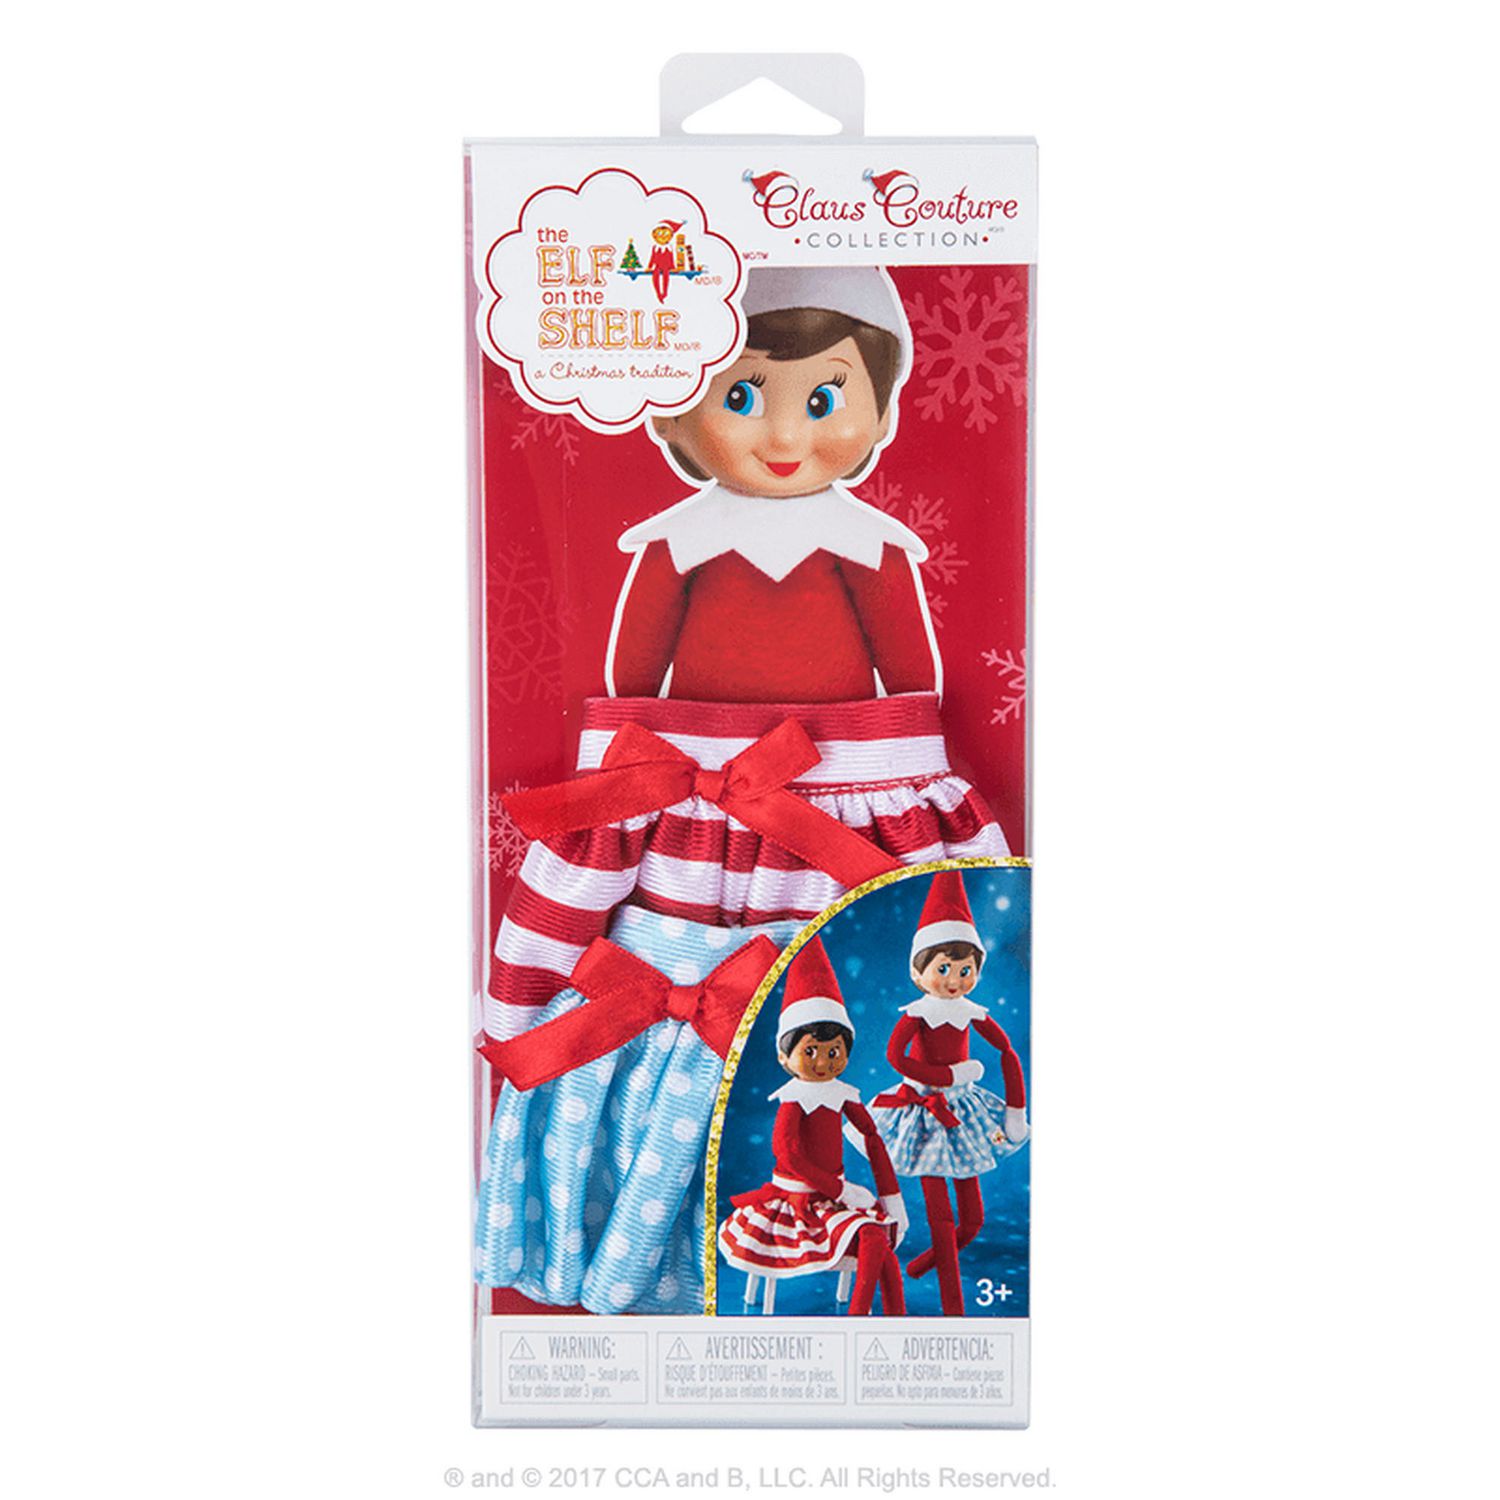 The Elf on the Shelf® - Claus Couture Collection® Twirling in the 